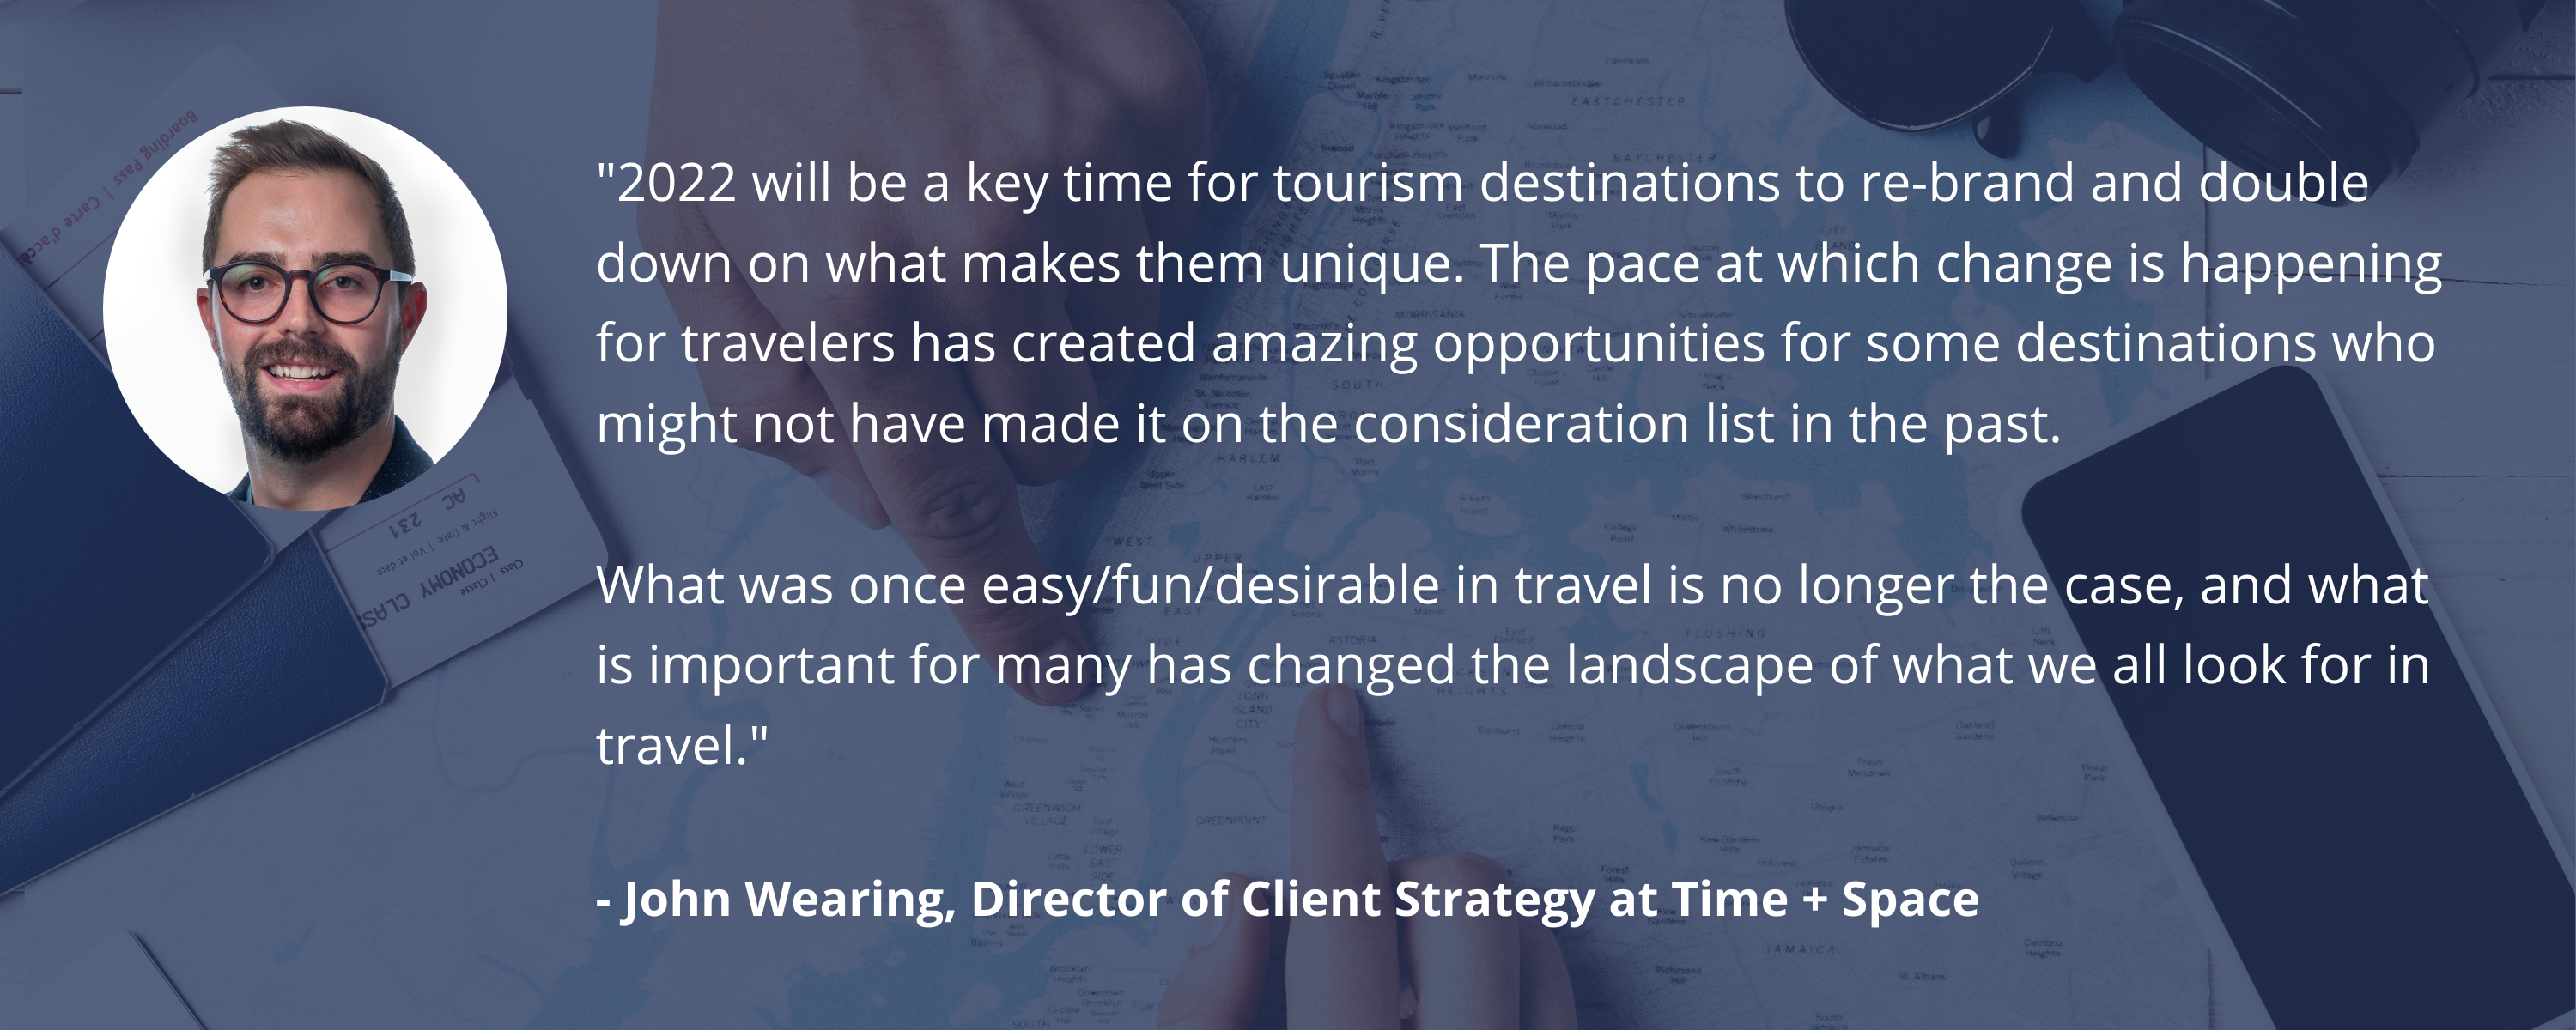 2022 will be a key time for tourism destinations to re-brand and double down on what makes them unique. The pace at which change is happening for travelers has created amazing opportunities for some destin